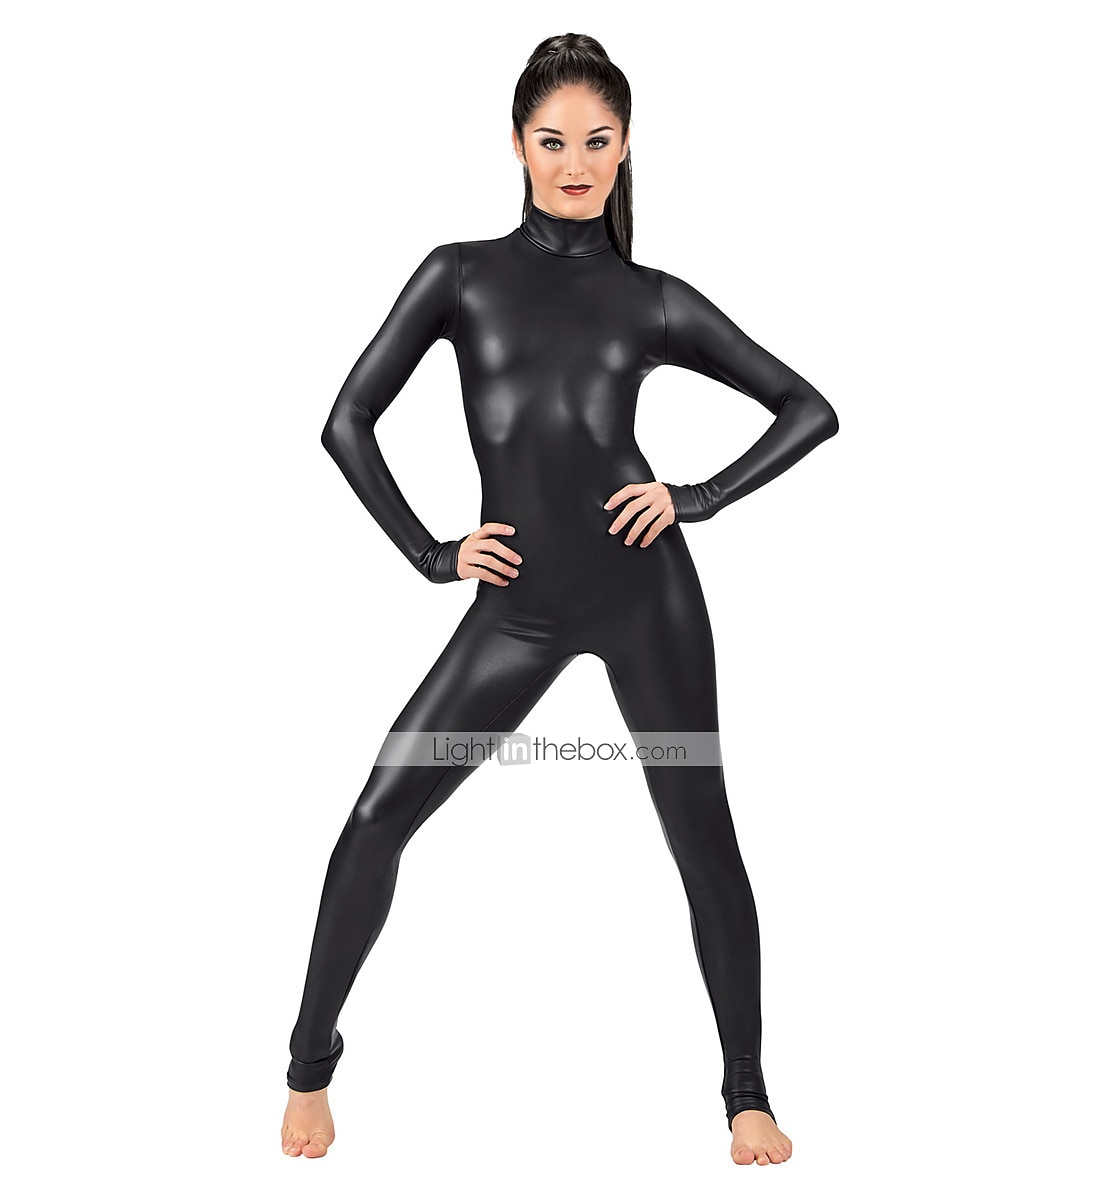 Women's Lycra Spandex Full Body Zentai Suit - Adult Catsuit for Halloween,  Fancy Dress Parties & Cosplay, Available in Multiple Colors